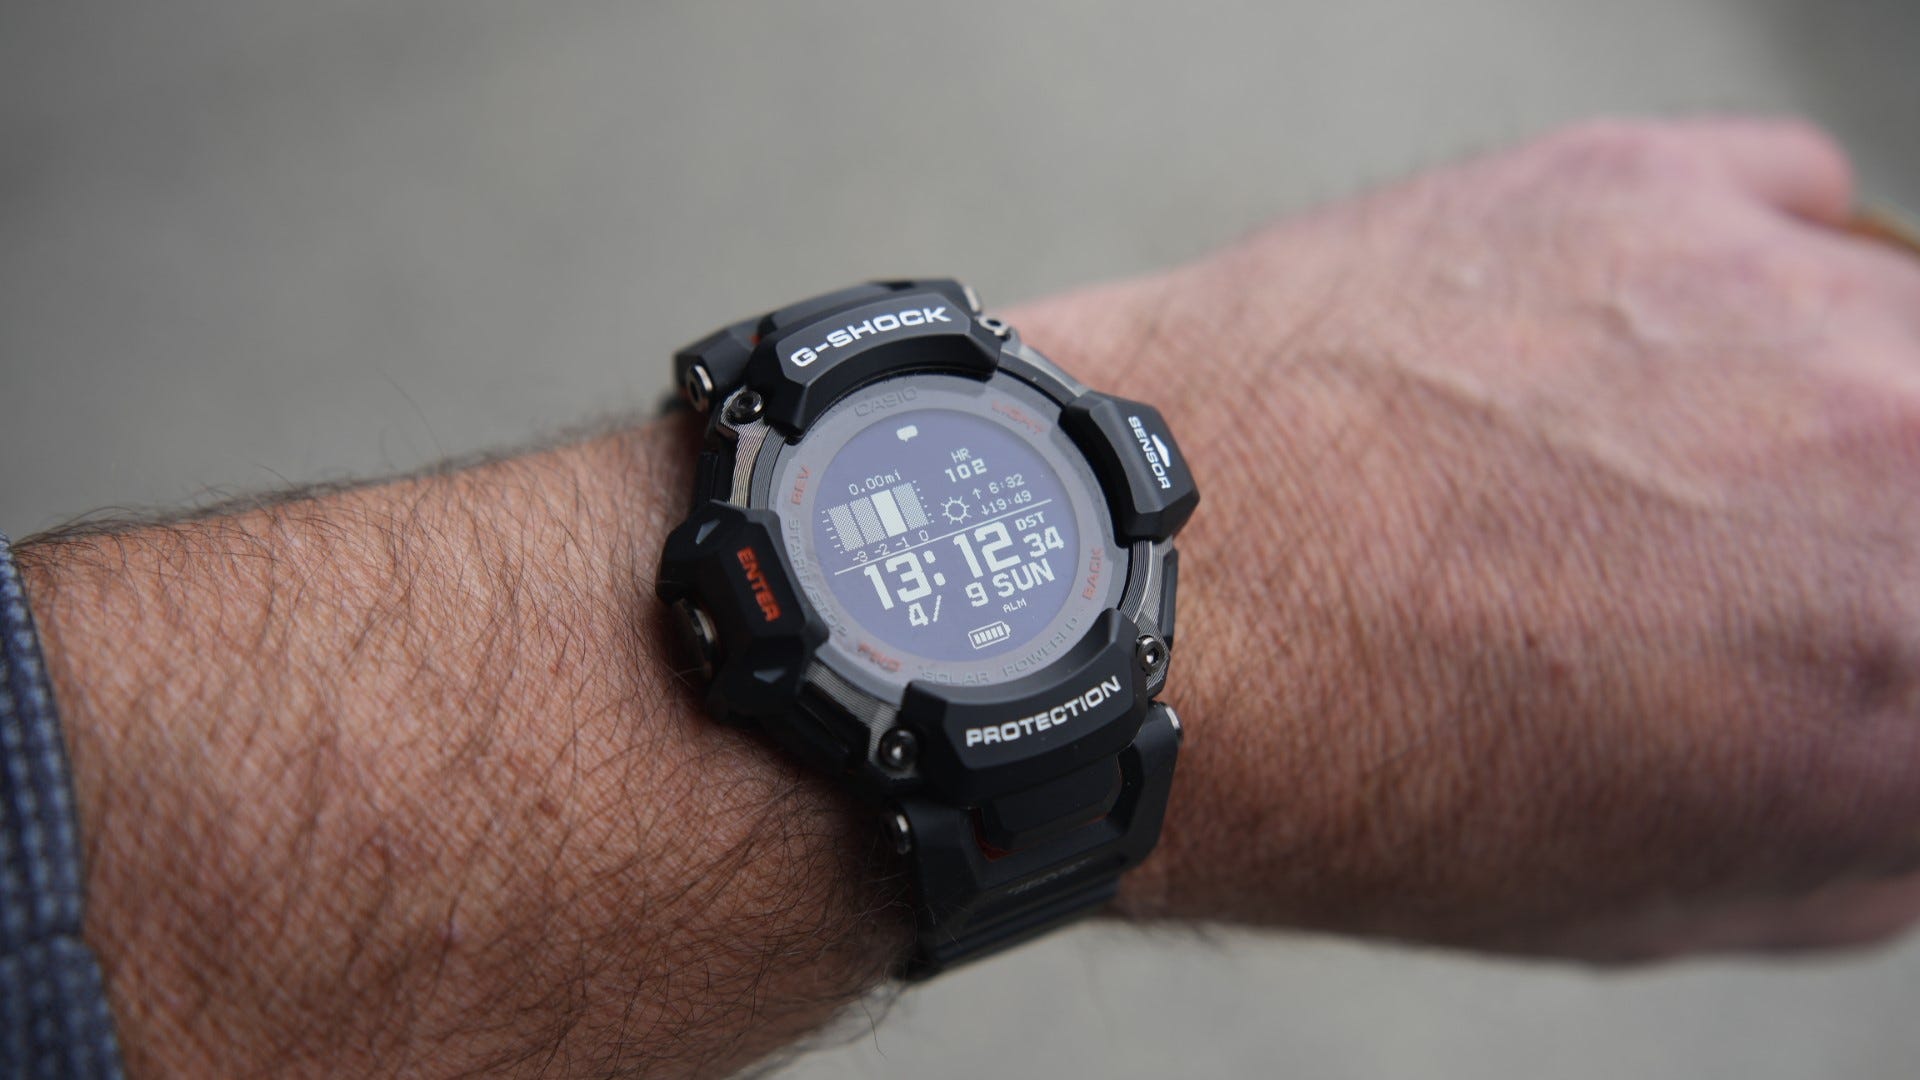 Casio G-SHOCK Move GBD-H2000 review: More than just a rugged watch